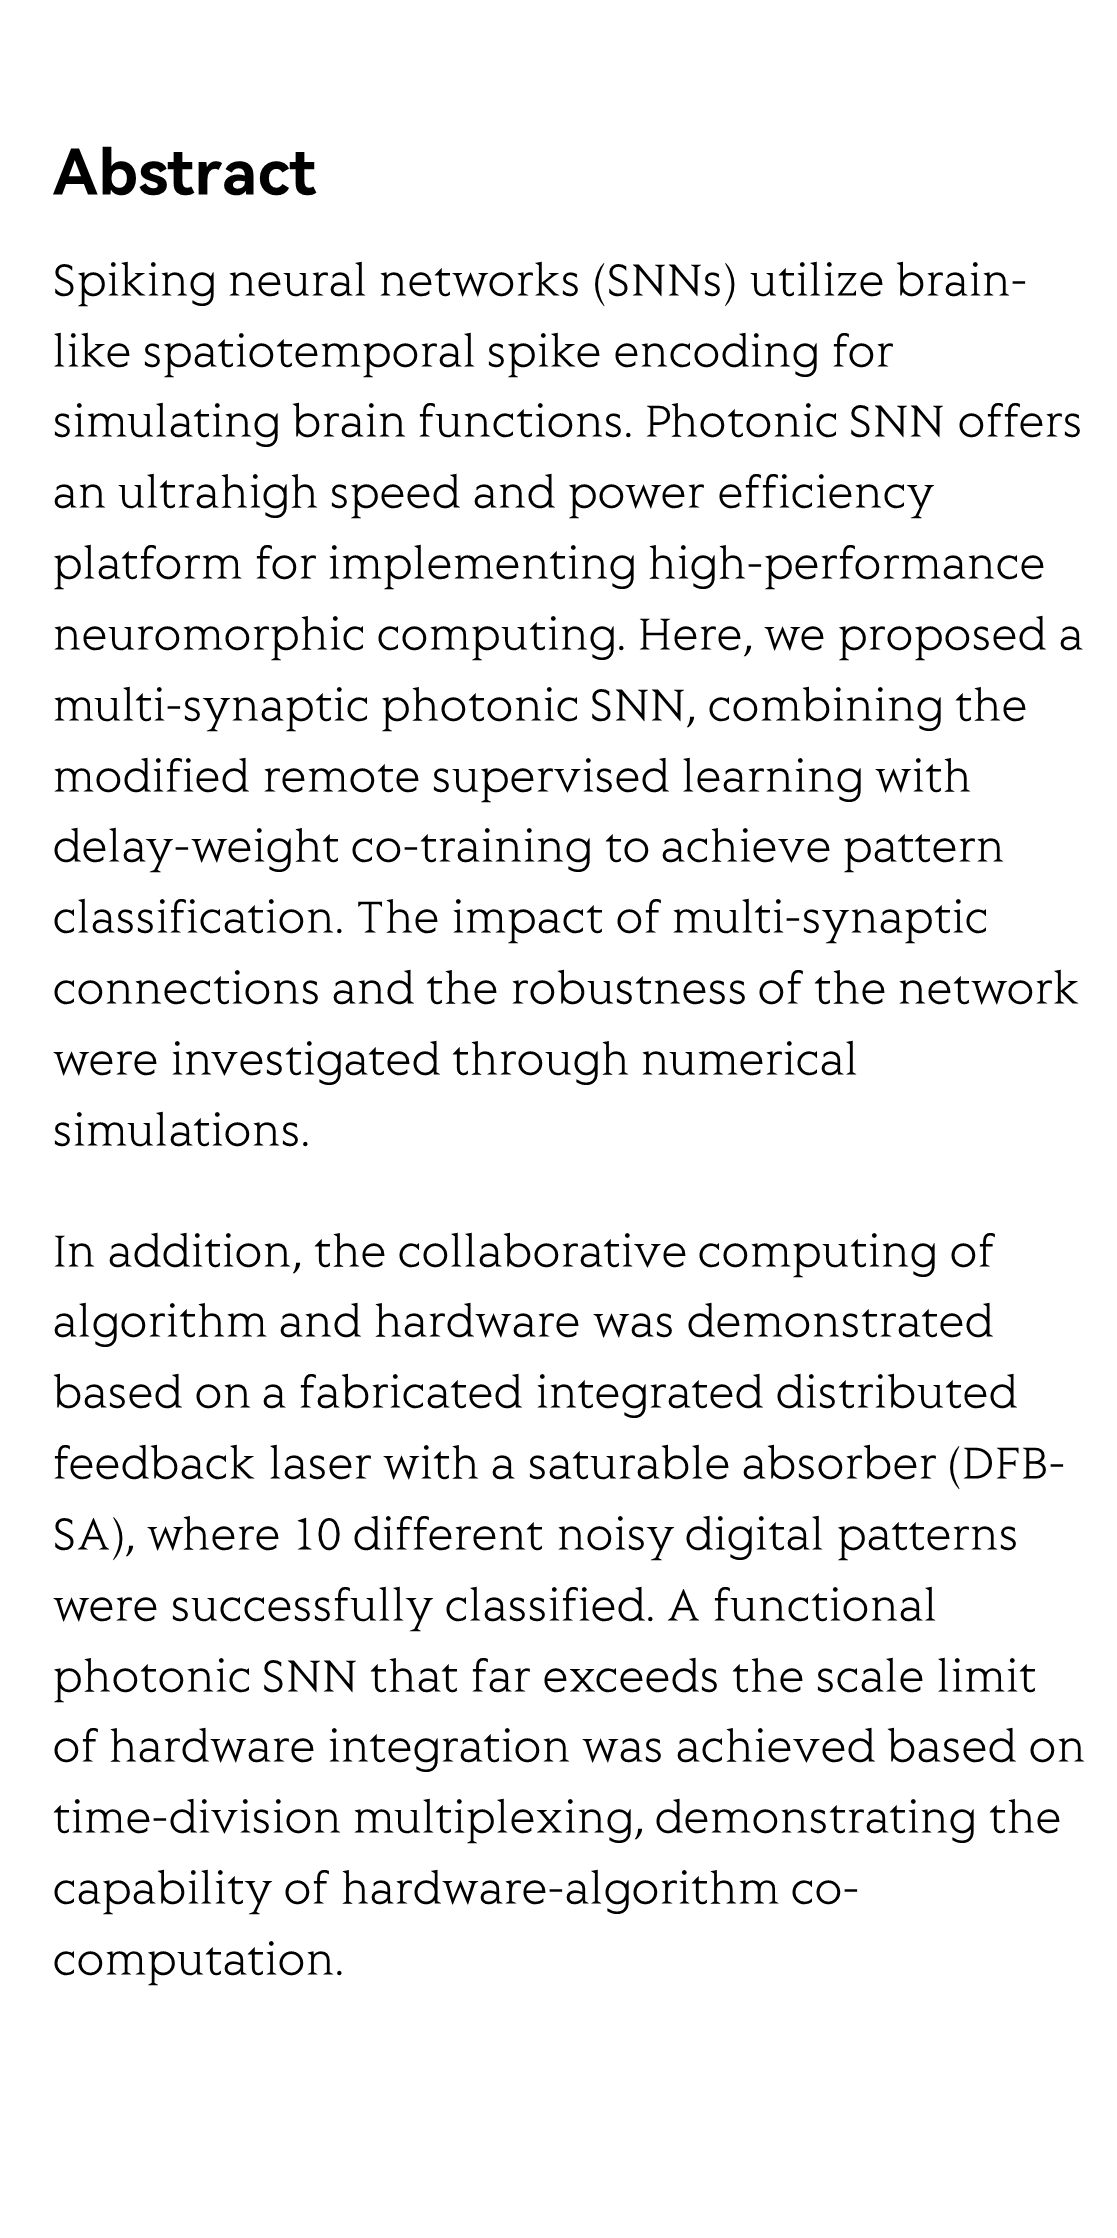 Pattern recognition in multi-synaptic photonic spiking neural networks based on a DFB-SA chip_2